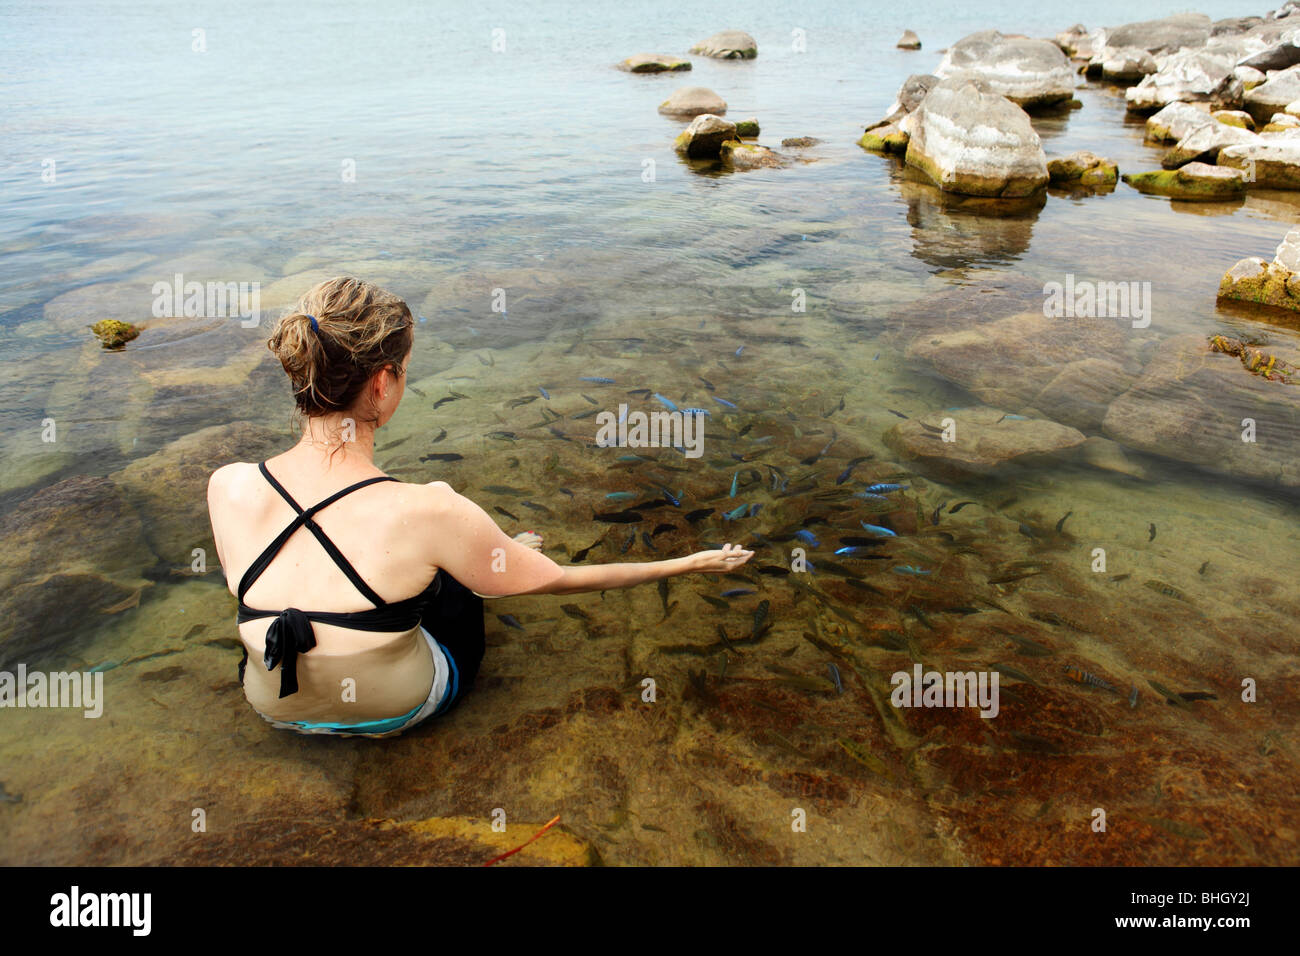 A woman sits with tropical fish in the fresh water lake of lake Malawi near Cape Maclear, Africa Stock Photo